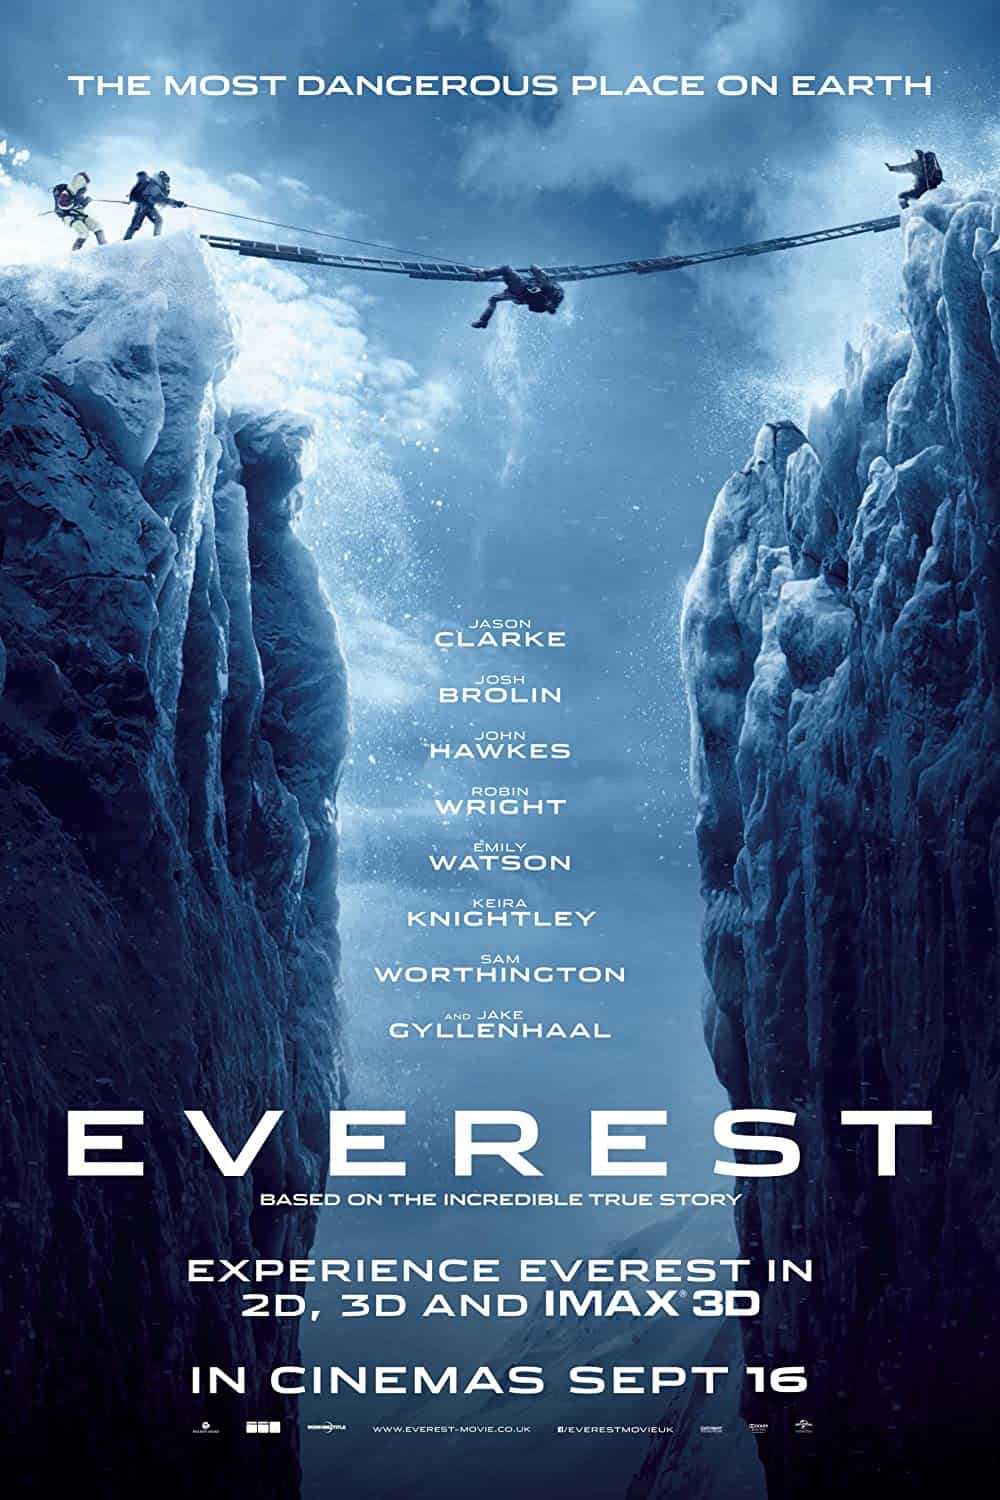 Everest (2015) Best Mountaineering Movies You Can't Miss